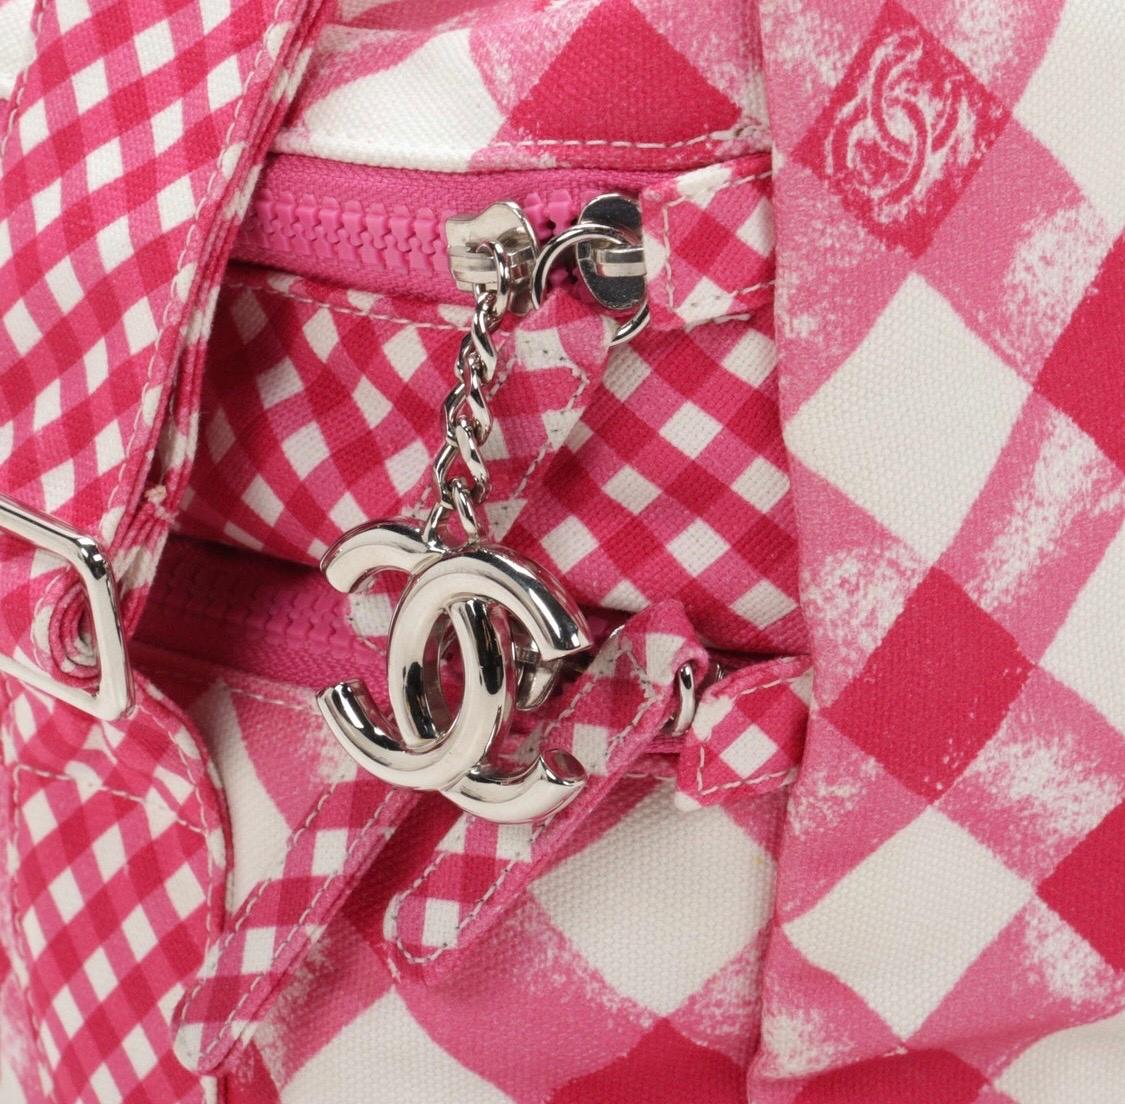 Picnic in style with this adorable novelty Chanel bag! Circa 2011, this Chanel lunch box bag is crafted from pink canvas gingham and features the iconic CC logo, two zipper closures with a CC pull, silver toned hardware and an adjustable shoulder